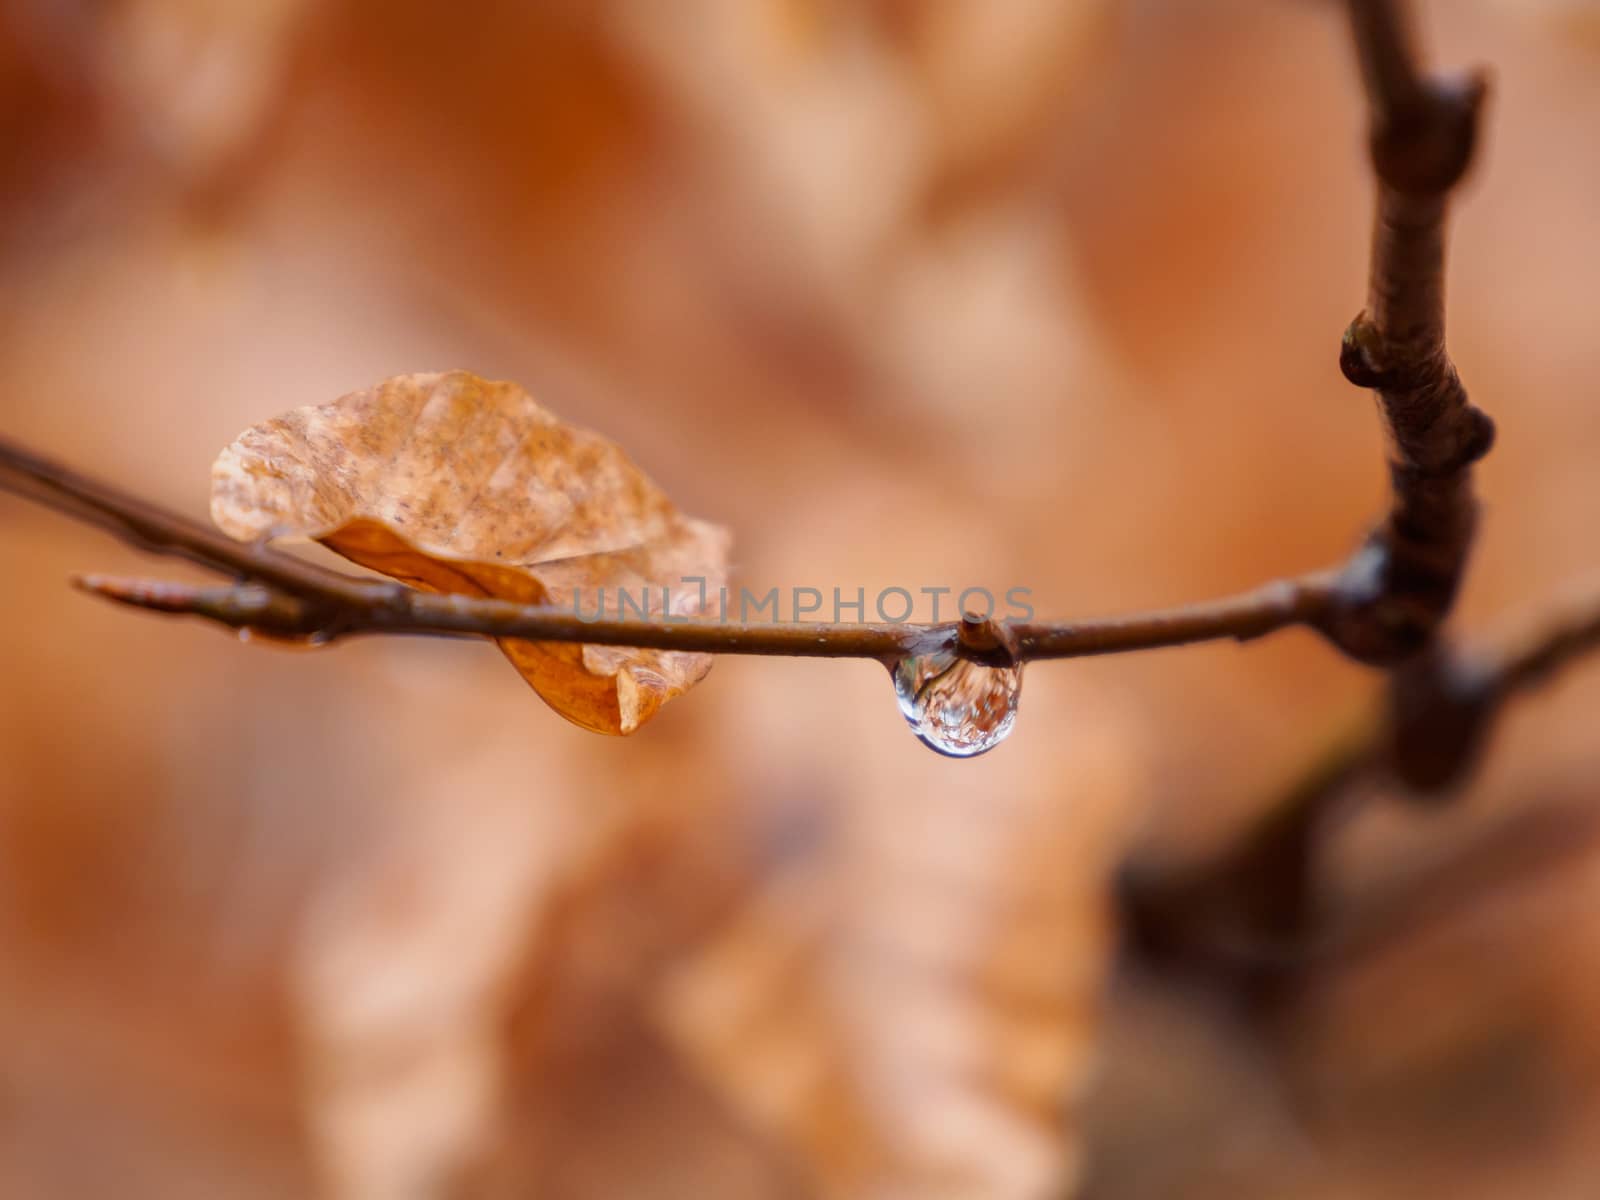 Autumn colors provide a blurred background to this water droplet hanging from a branch